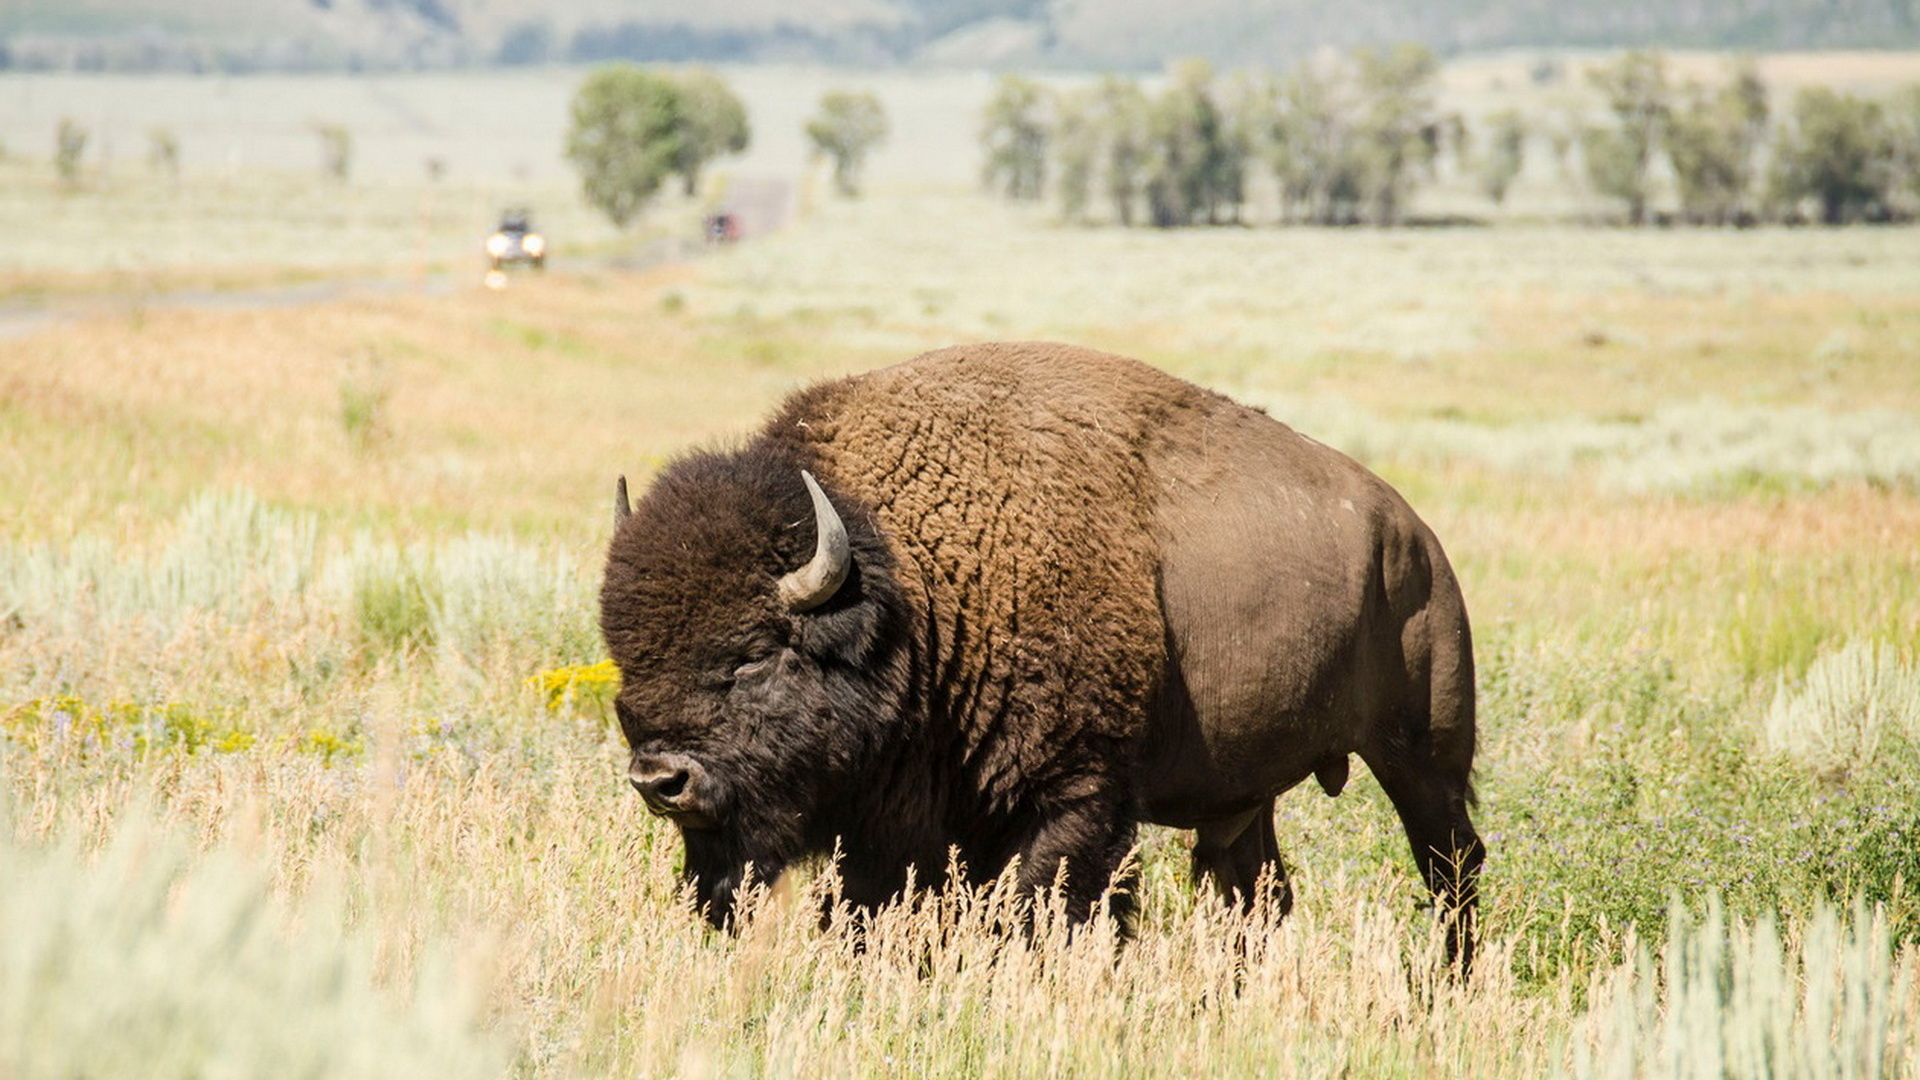 American Bison Wallpapers 5 - 1920 X 1080 | stmed.net